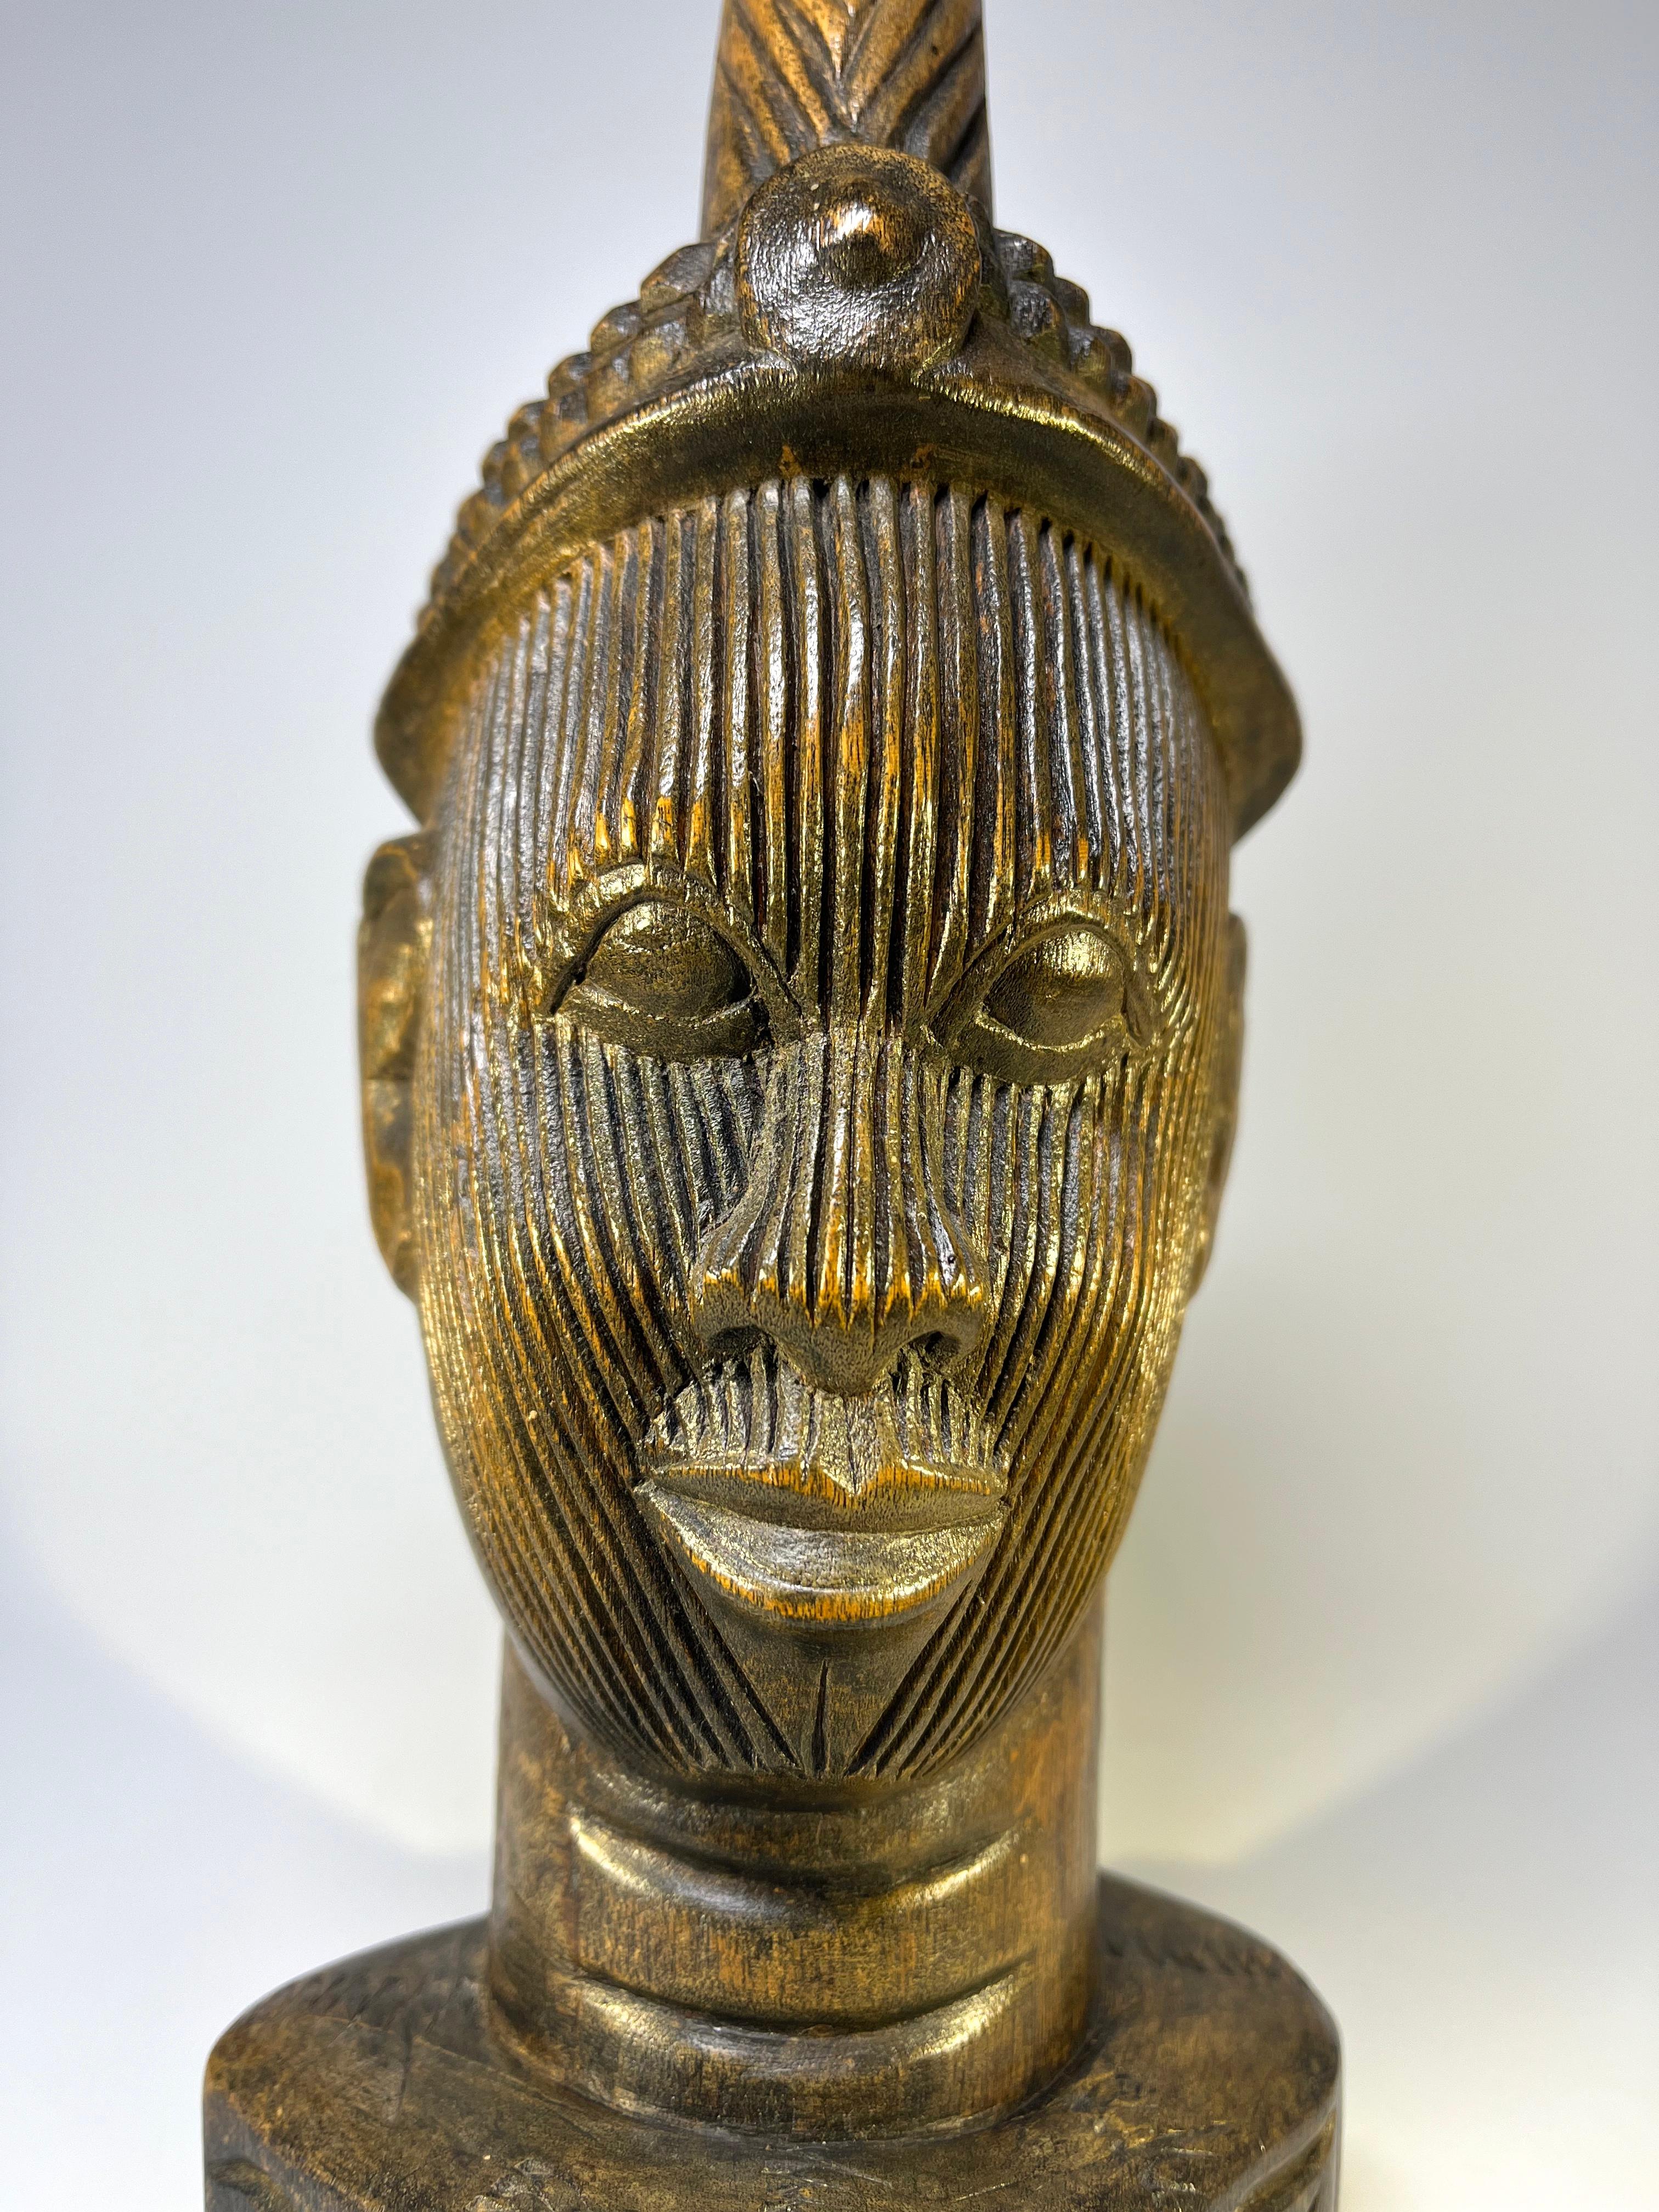 Fascinating detailed Olokun head from the Kingdom of Ife in Western Nigeria.
Hand carved hardwood face with almond shaped eyes, neck creases and astounding facial incisions
Circa 1970
Measures: height 12 inch, width 4.5 inch, depth 4.5 inch
In